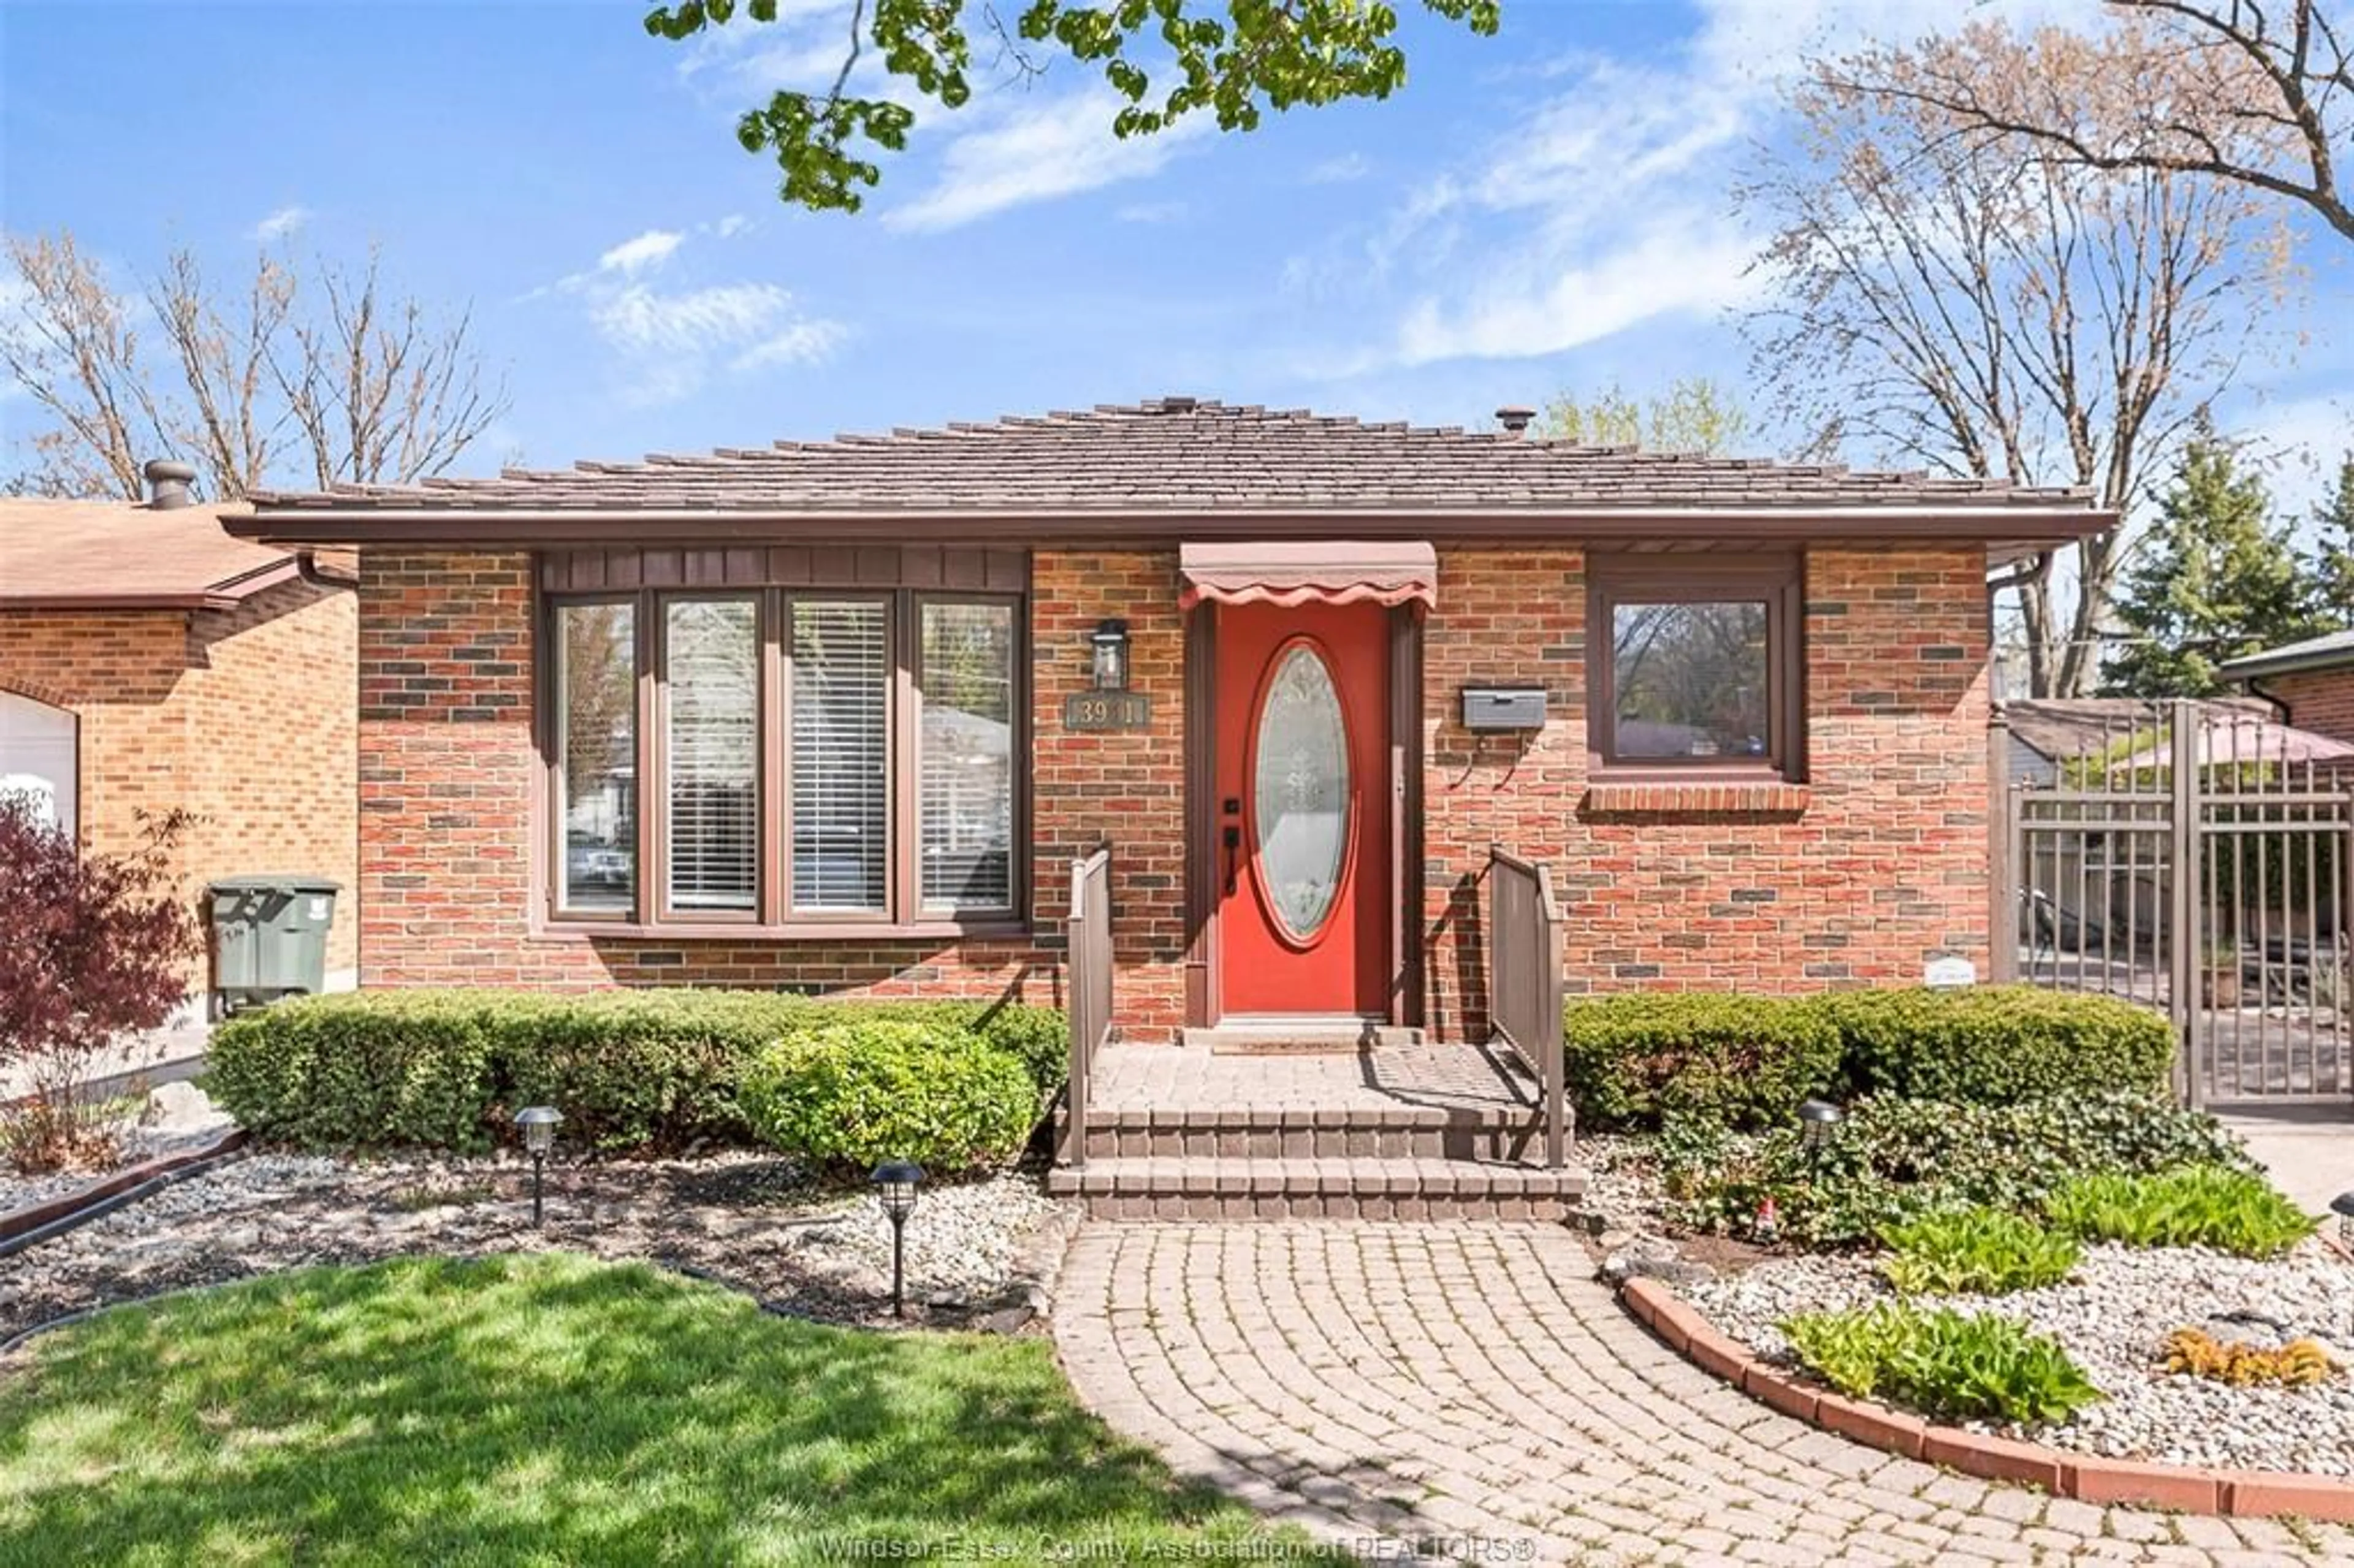 Home with brick exterior material for 3981 WHITNEY, Windsor Ontario N9C 2C7